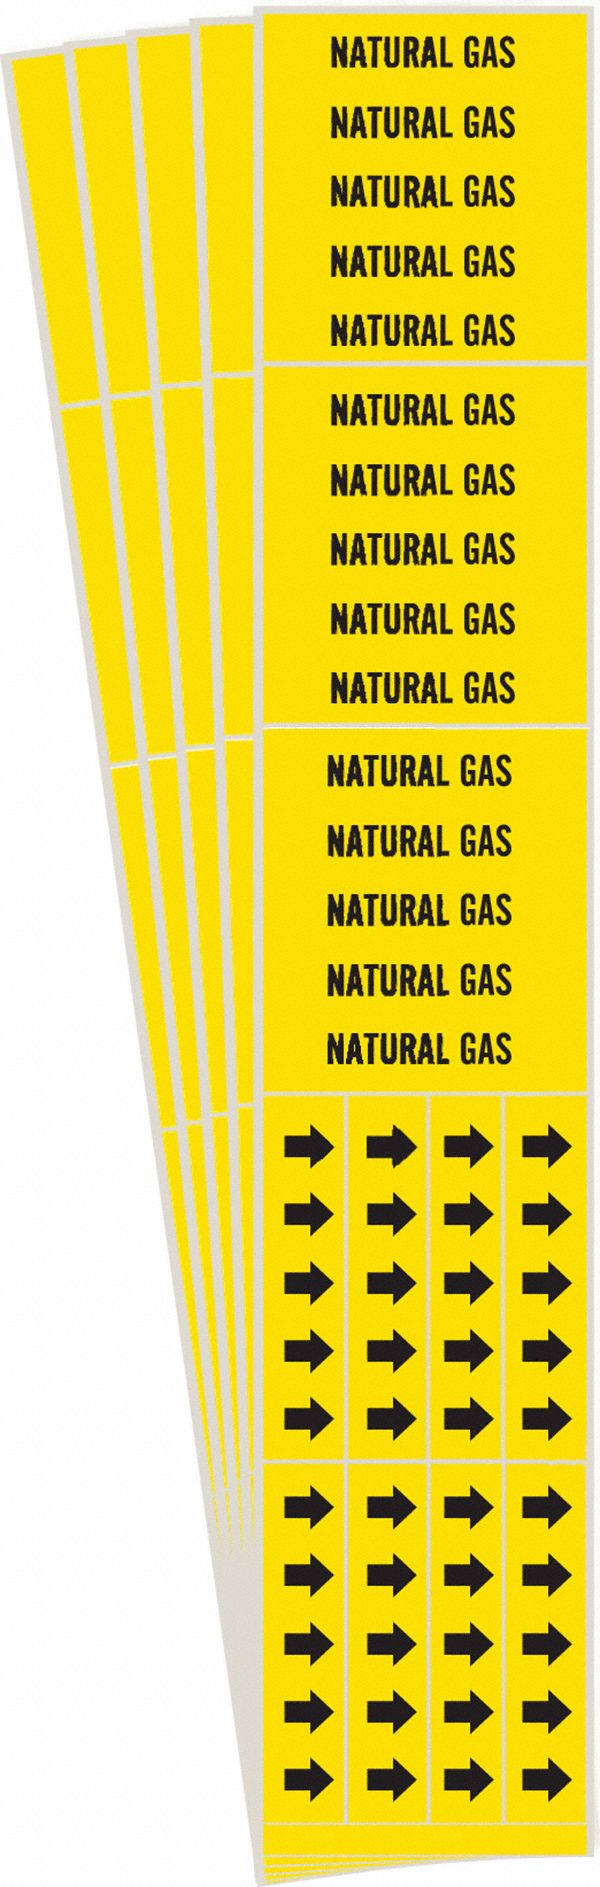 NATURAL GAS PIPE MARKER 3C BK ON YL 5/PK